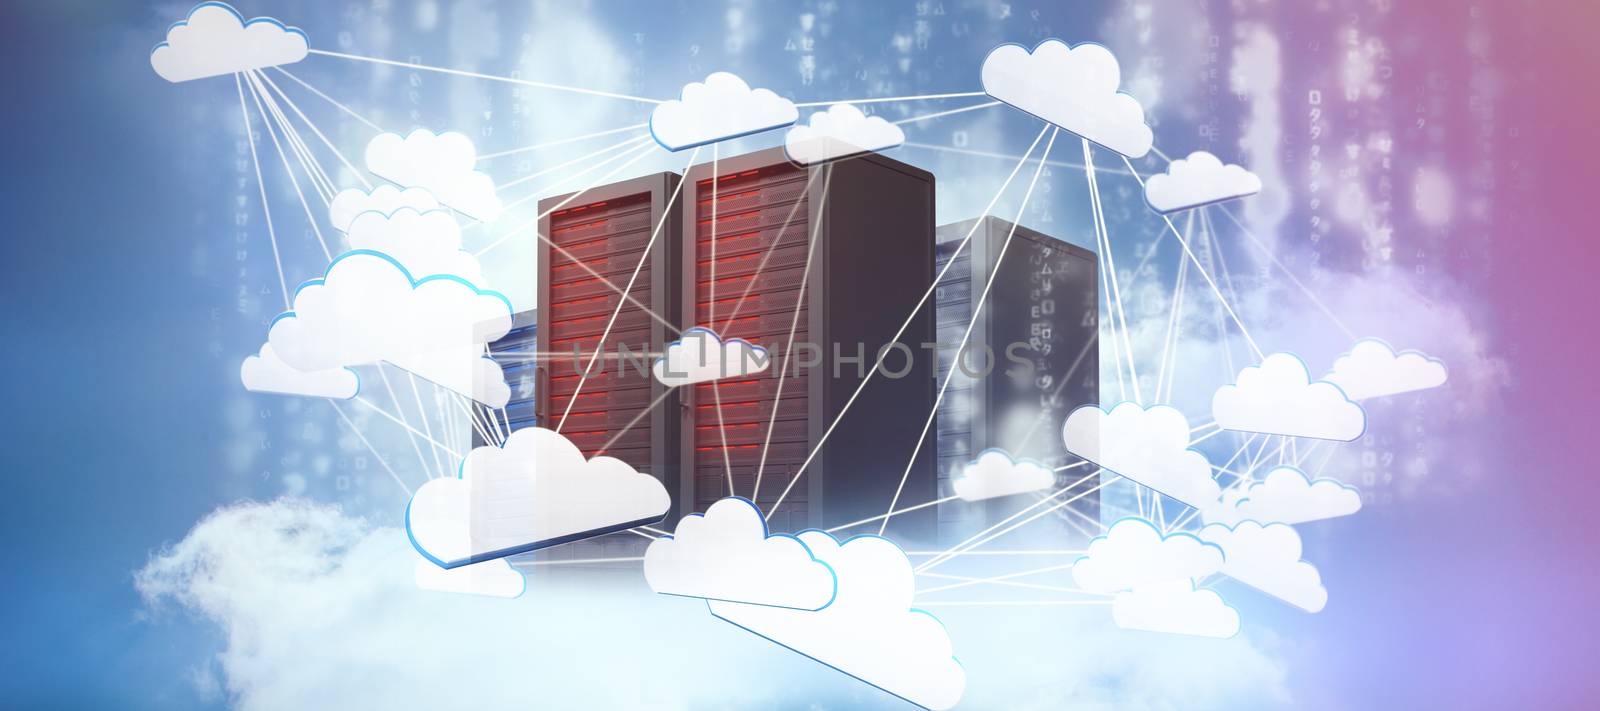 Abstract image of cloud computing symbol against server racks against sky and cloud